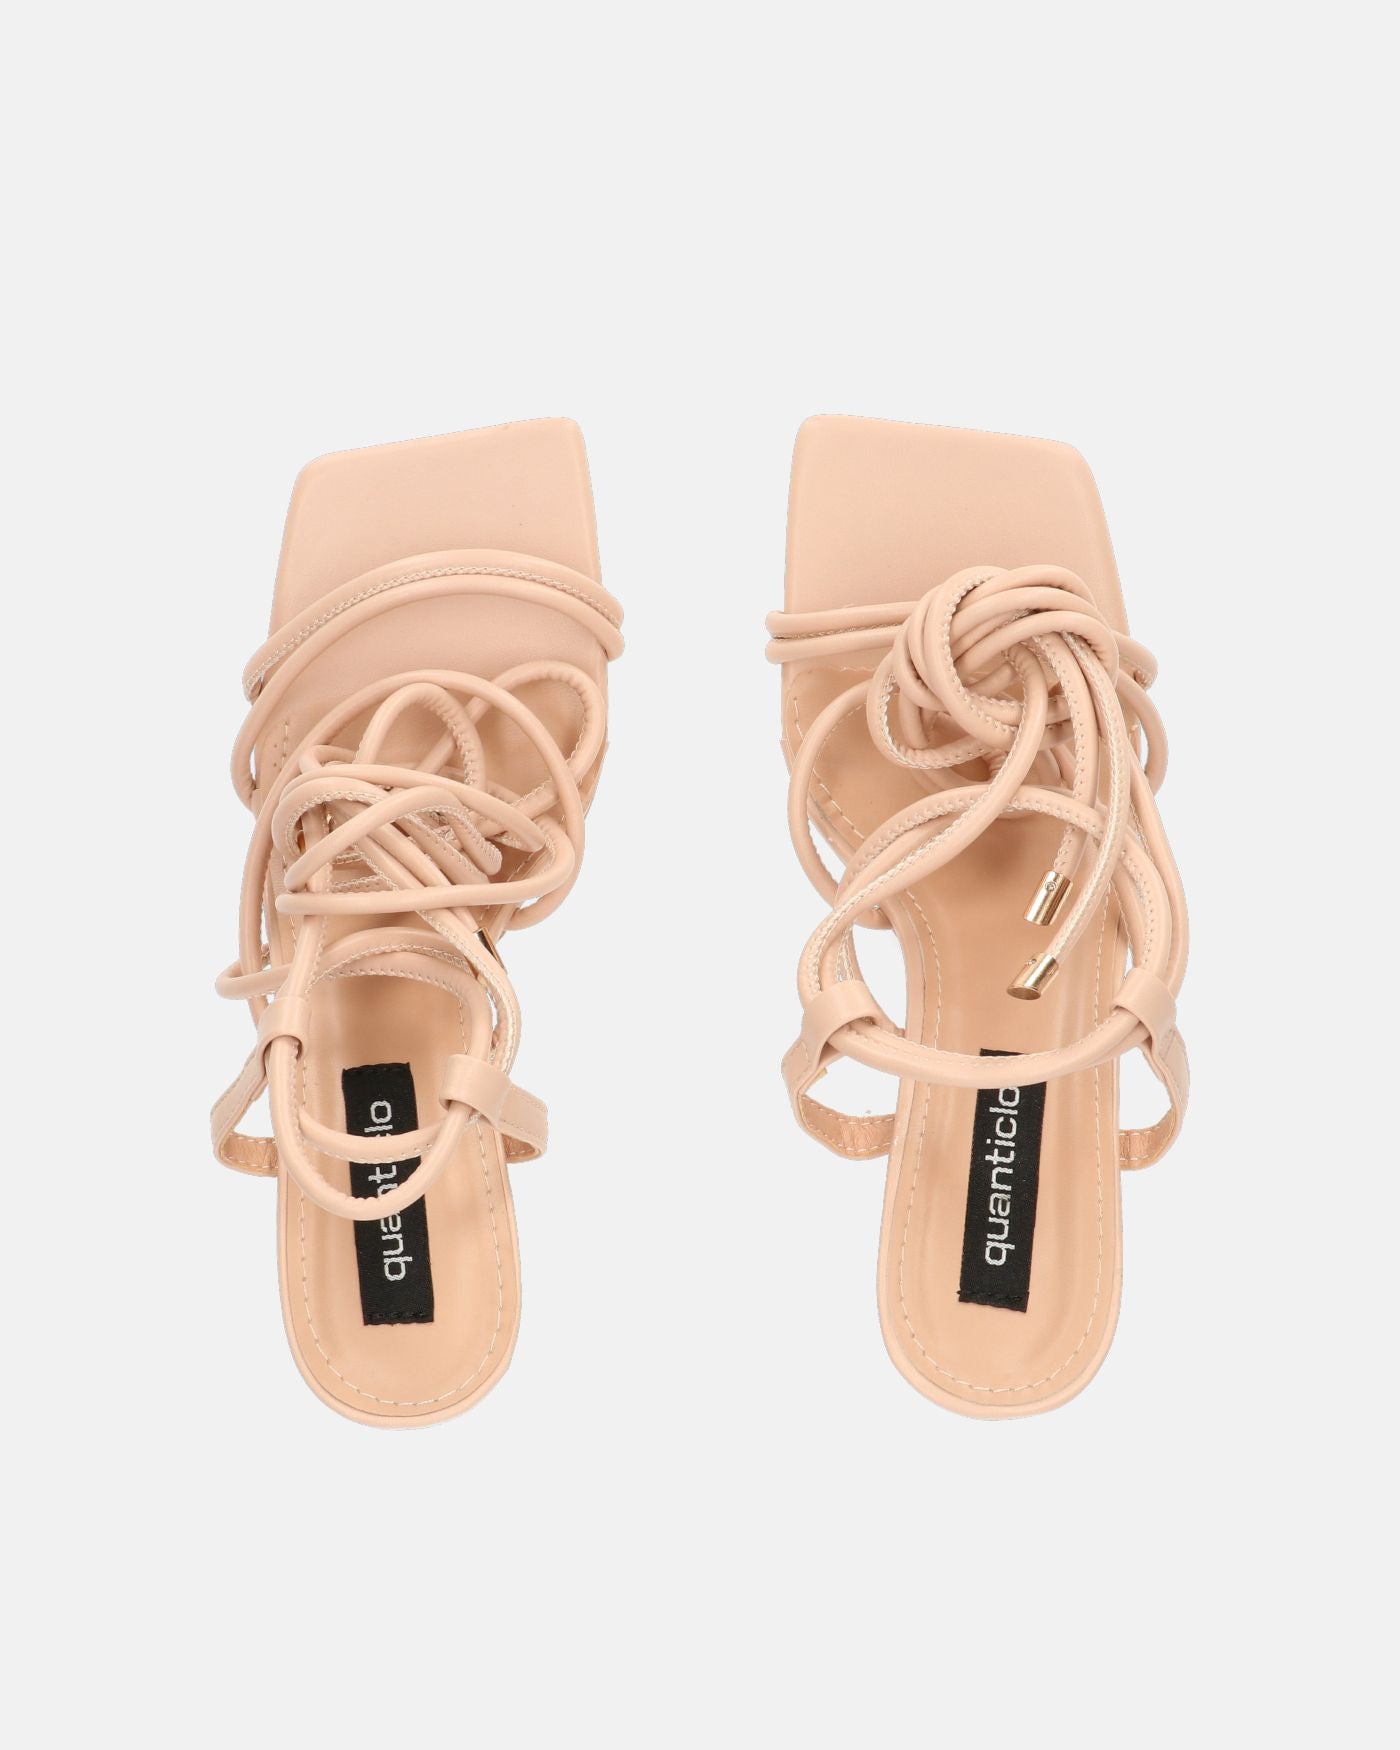 MARISOL - beige heeled sandals with laces